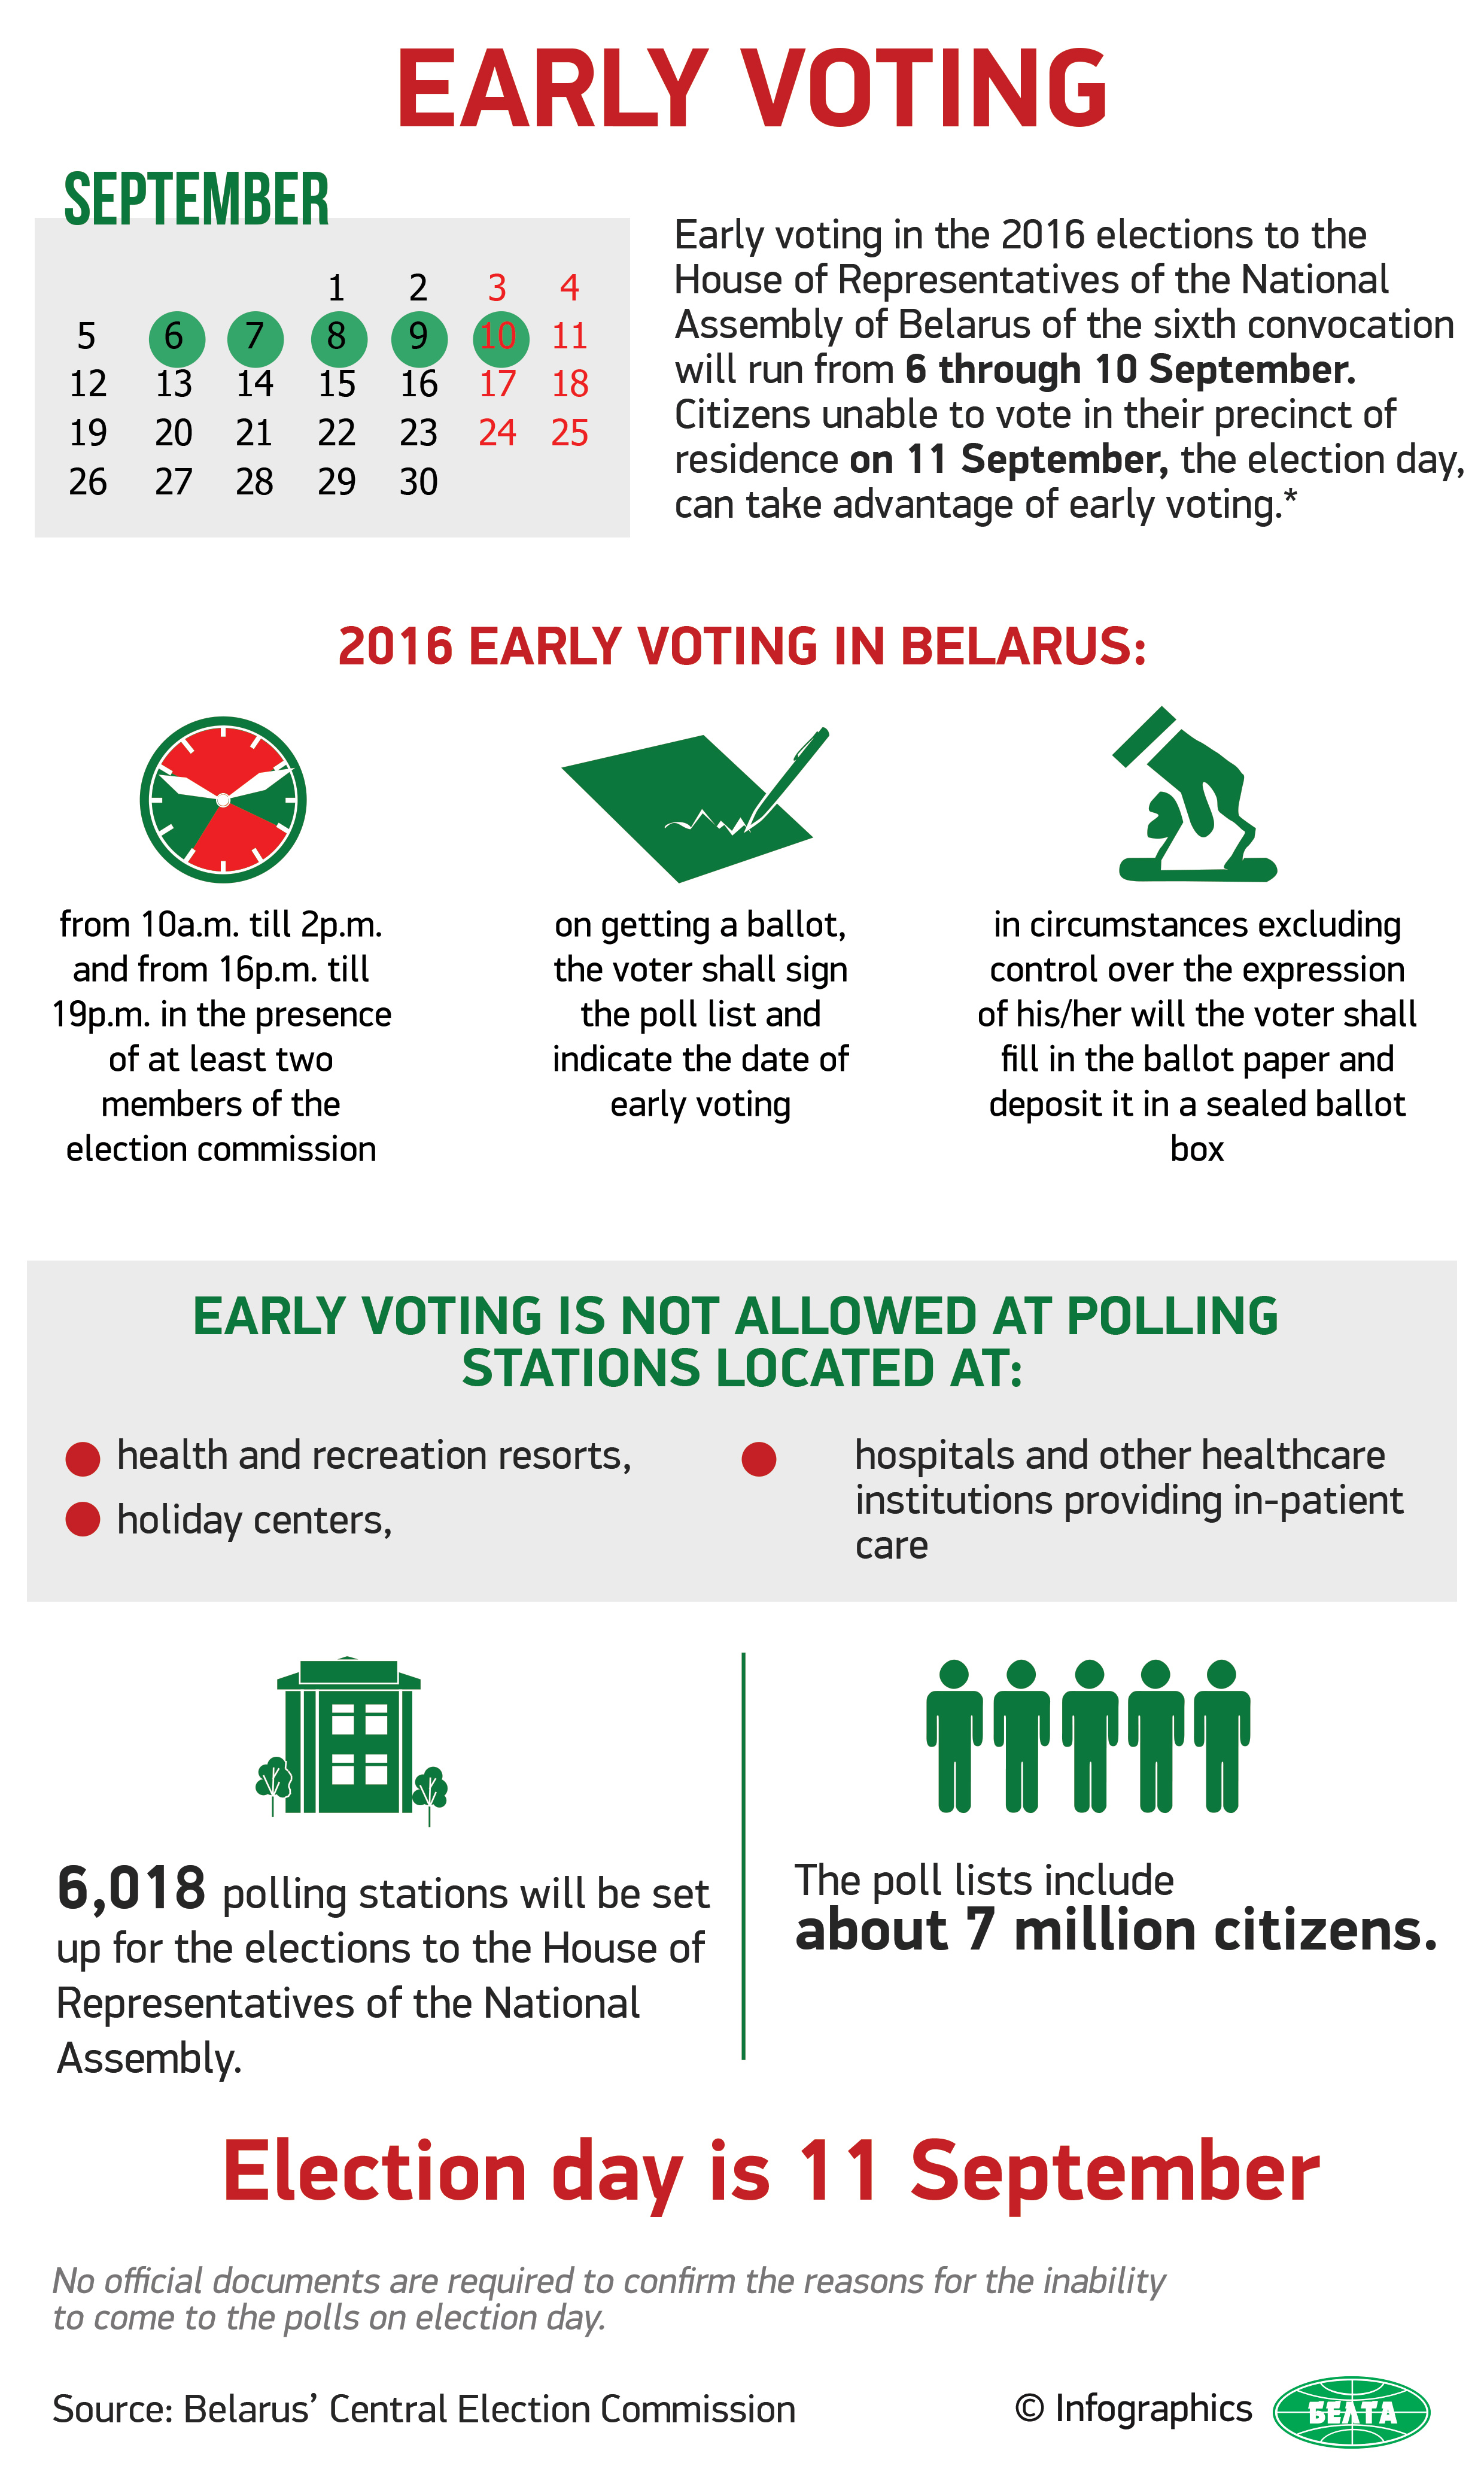 Early voting in Belarus’ parliament elections